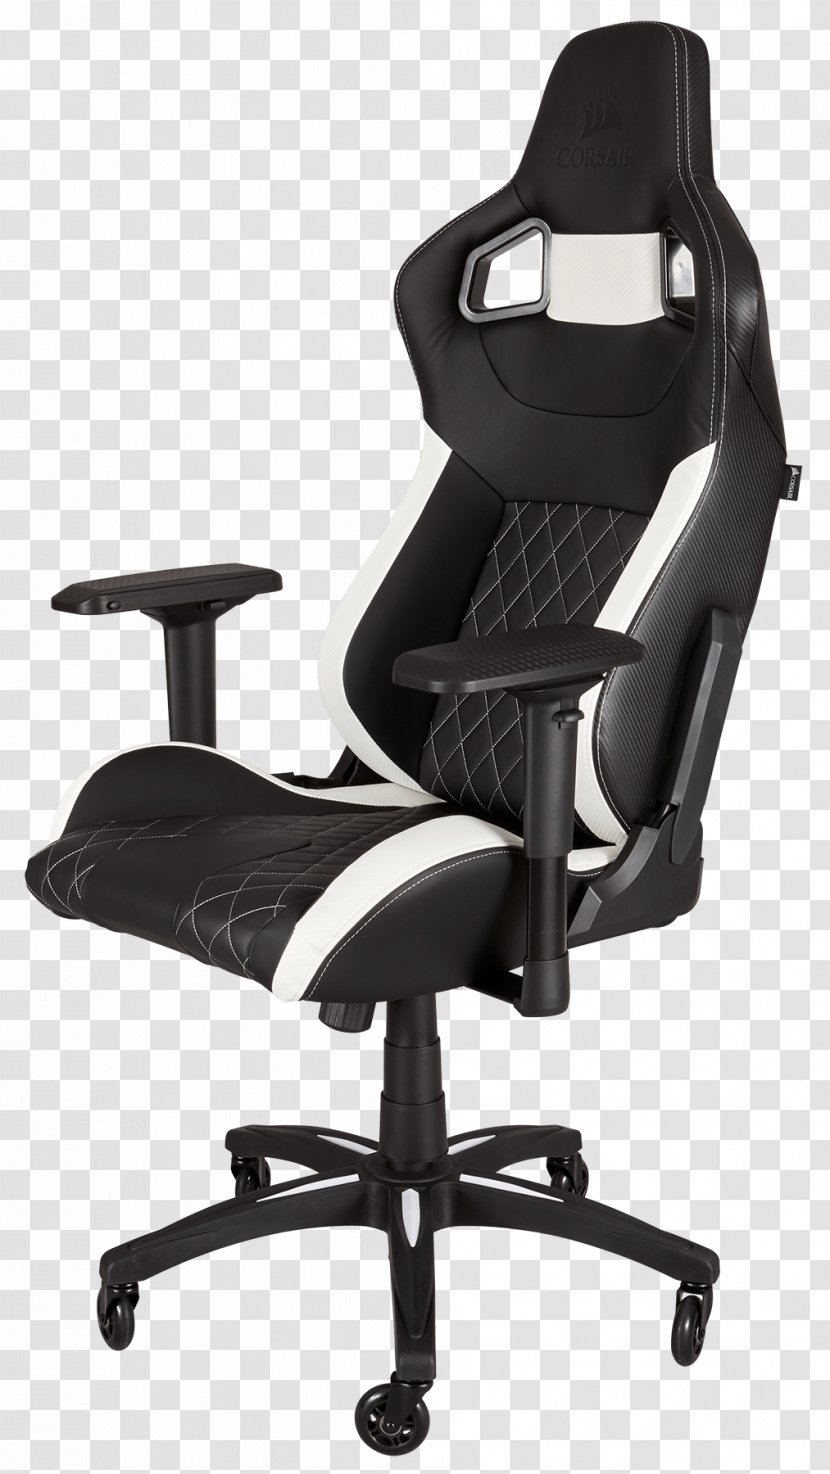 Gaming Chair Office & Desk Chairs Furniture Seat - Comfort Transparent PNG